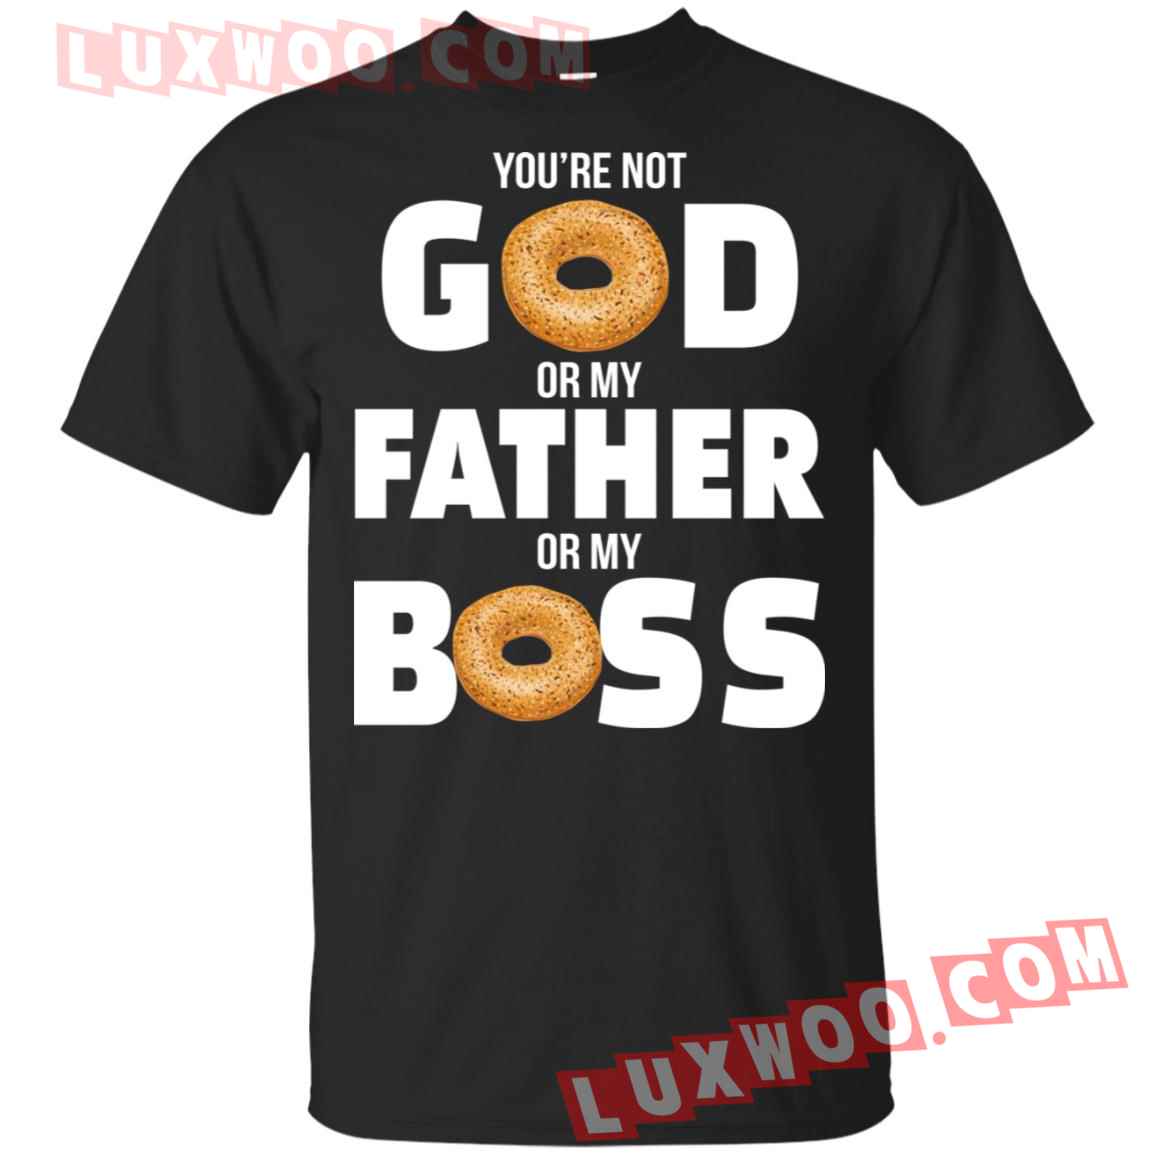 Bagel Youre Not God Or My Father Or My Boss Shirt